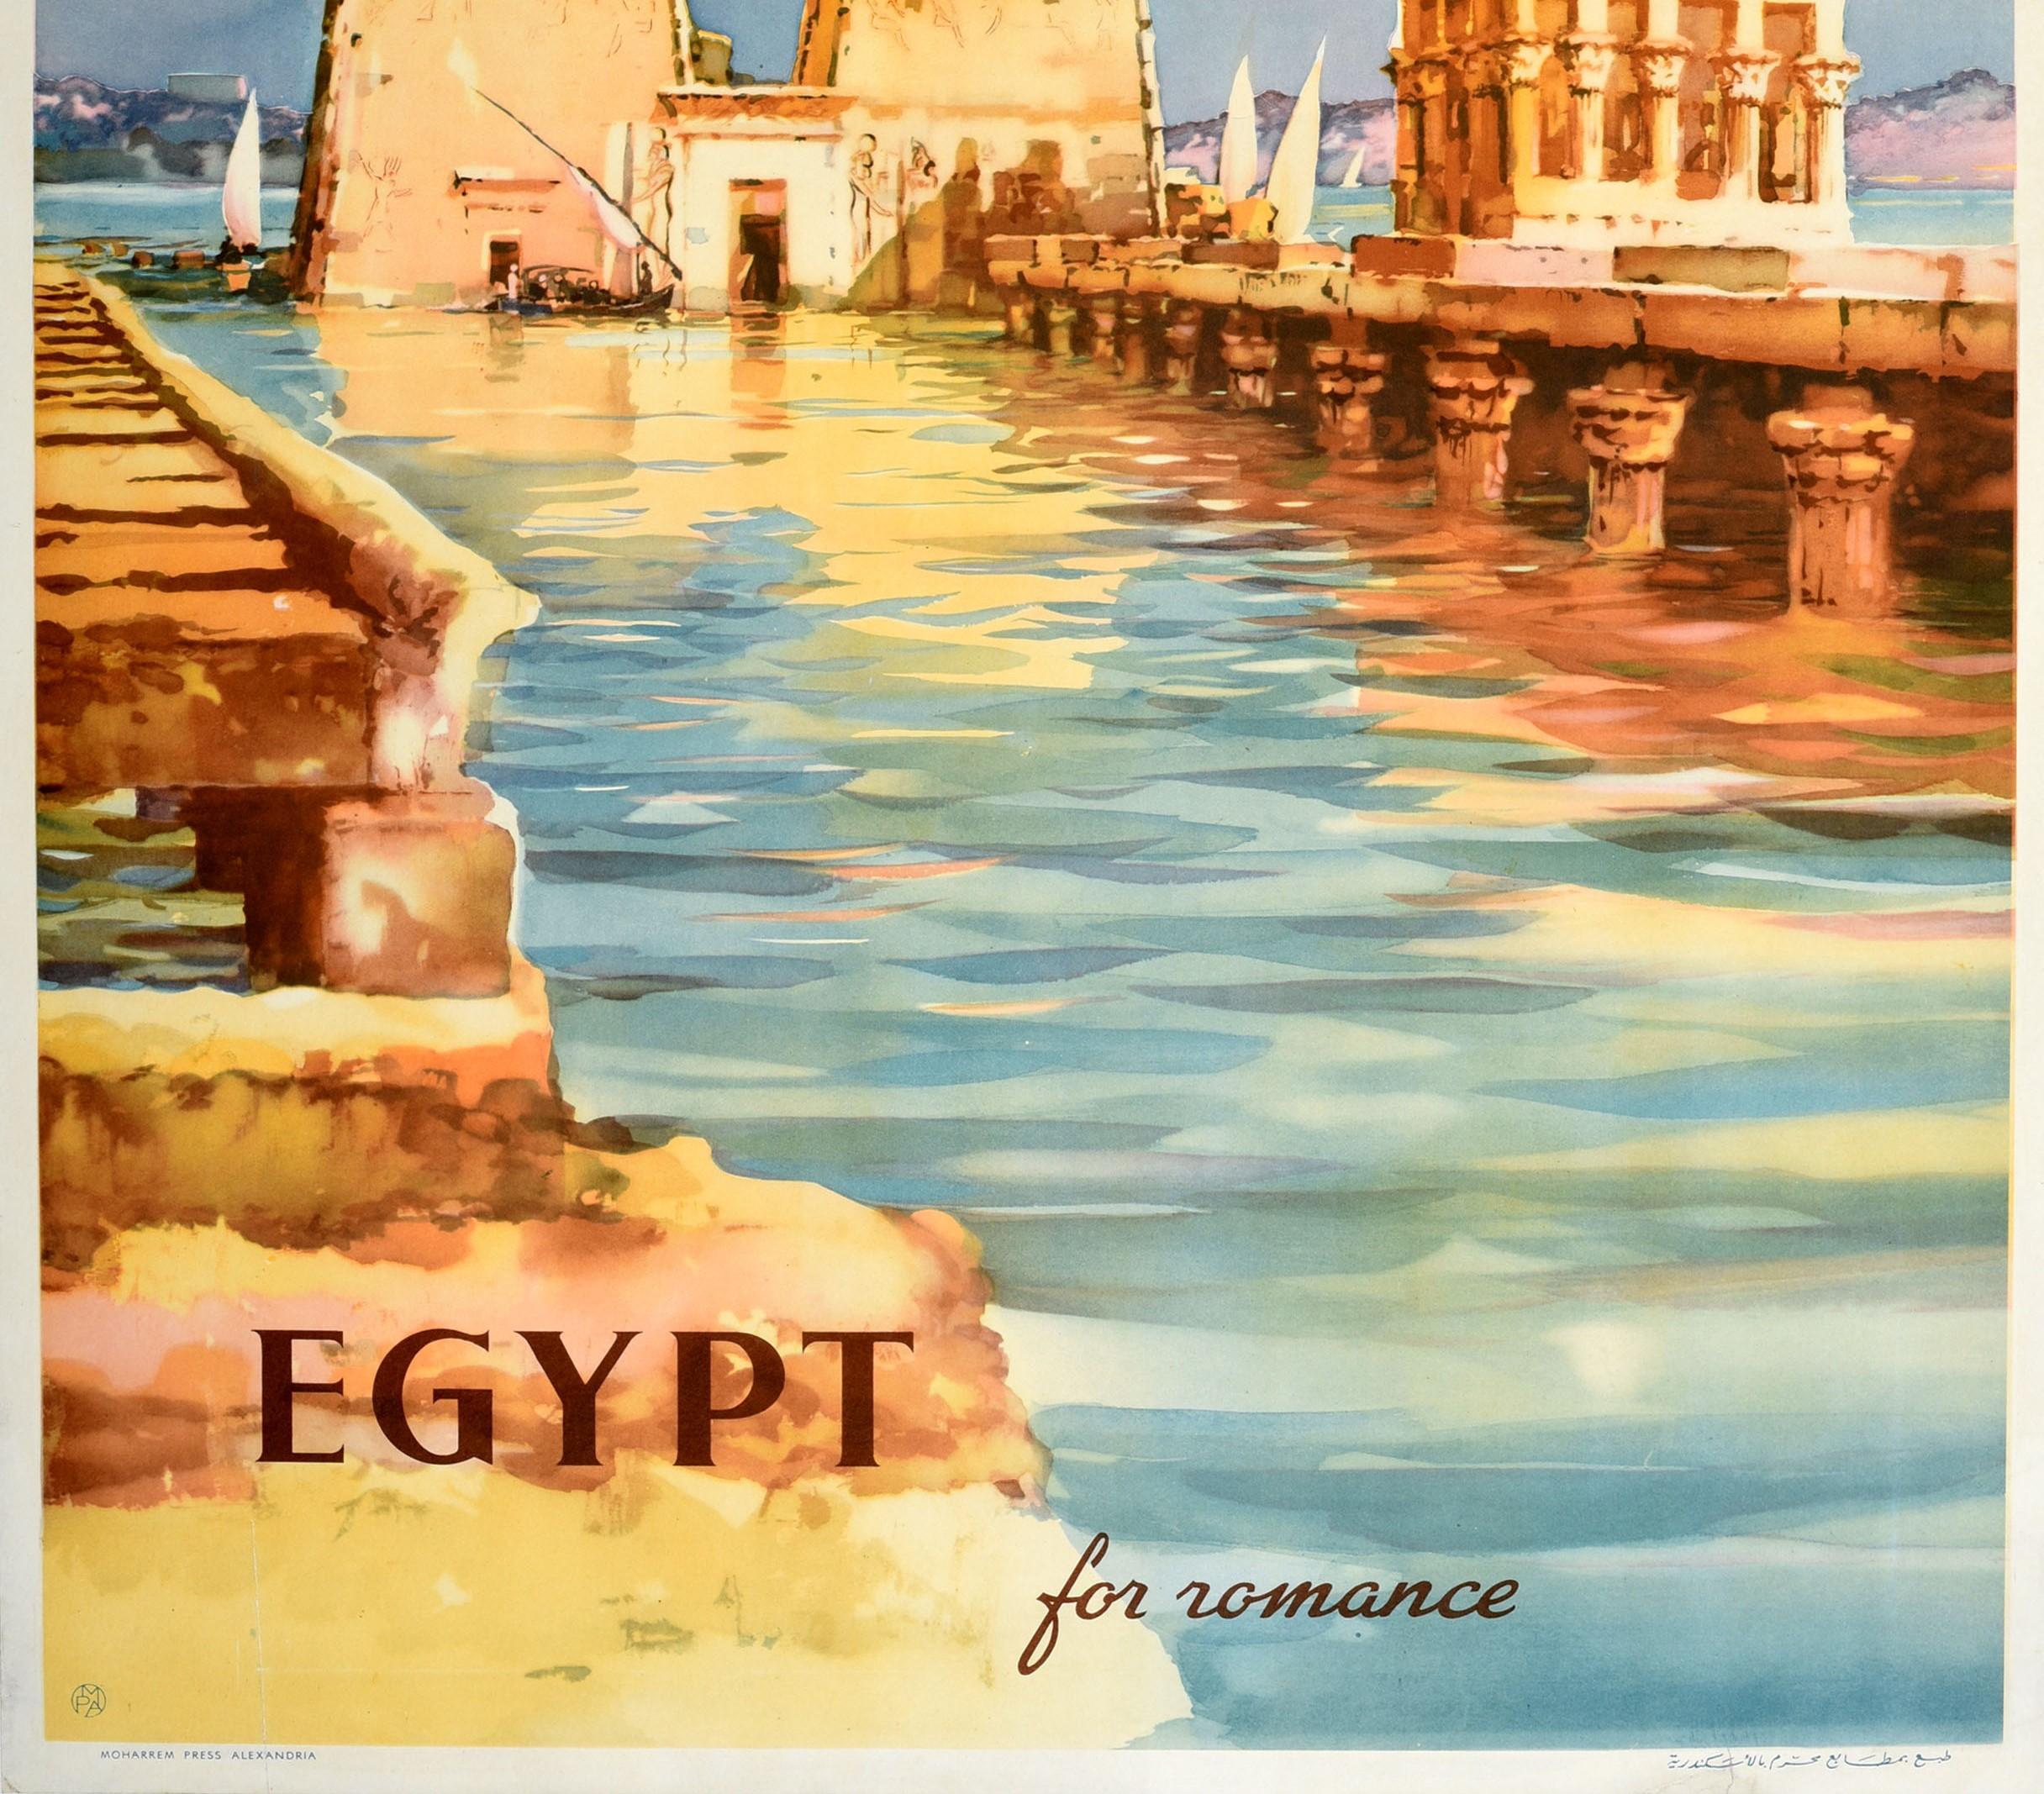 Egyptian Original Vintage Travel Poster Egypt For Romance River Nile View Felucca Boats